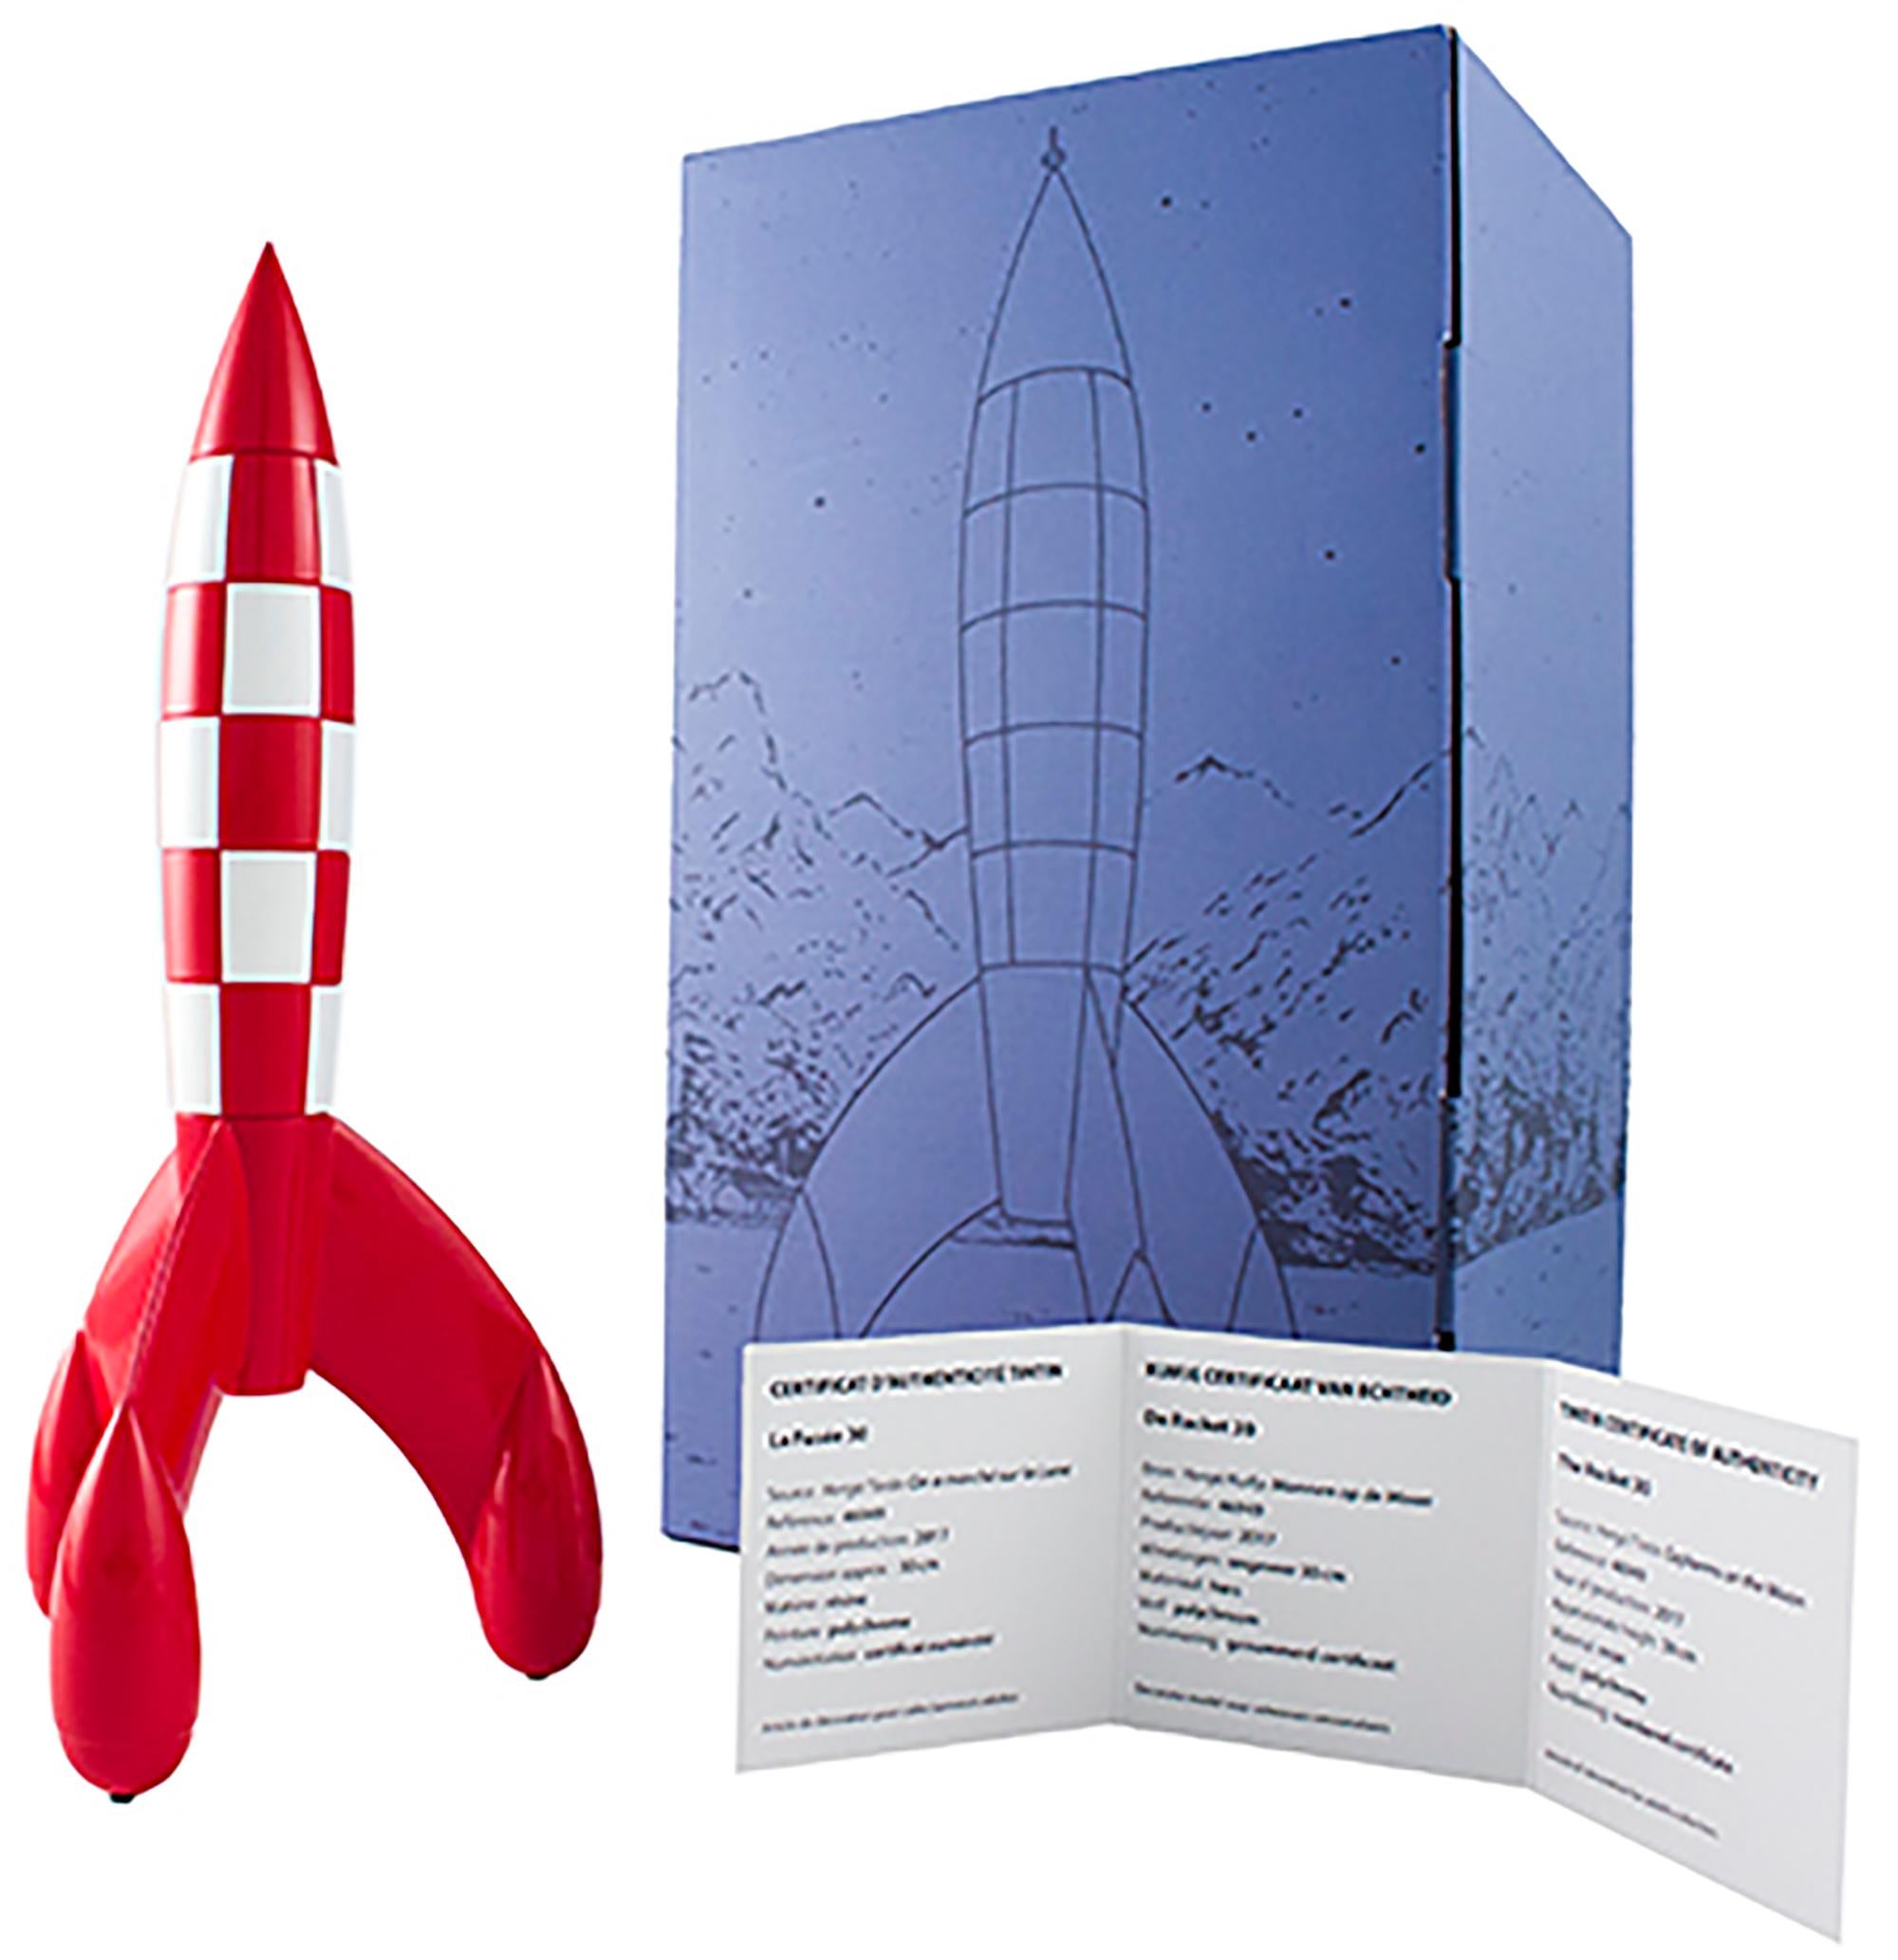 This resin figurine was modeled after the rocket from the Tintin comic "Explorers on the Moon". All figurines come with a numbered certificate of authenticity.
